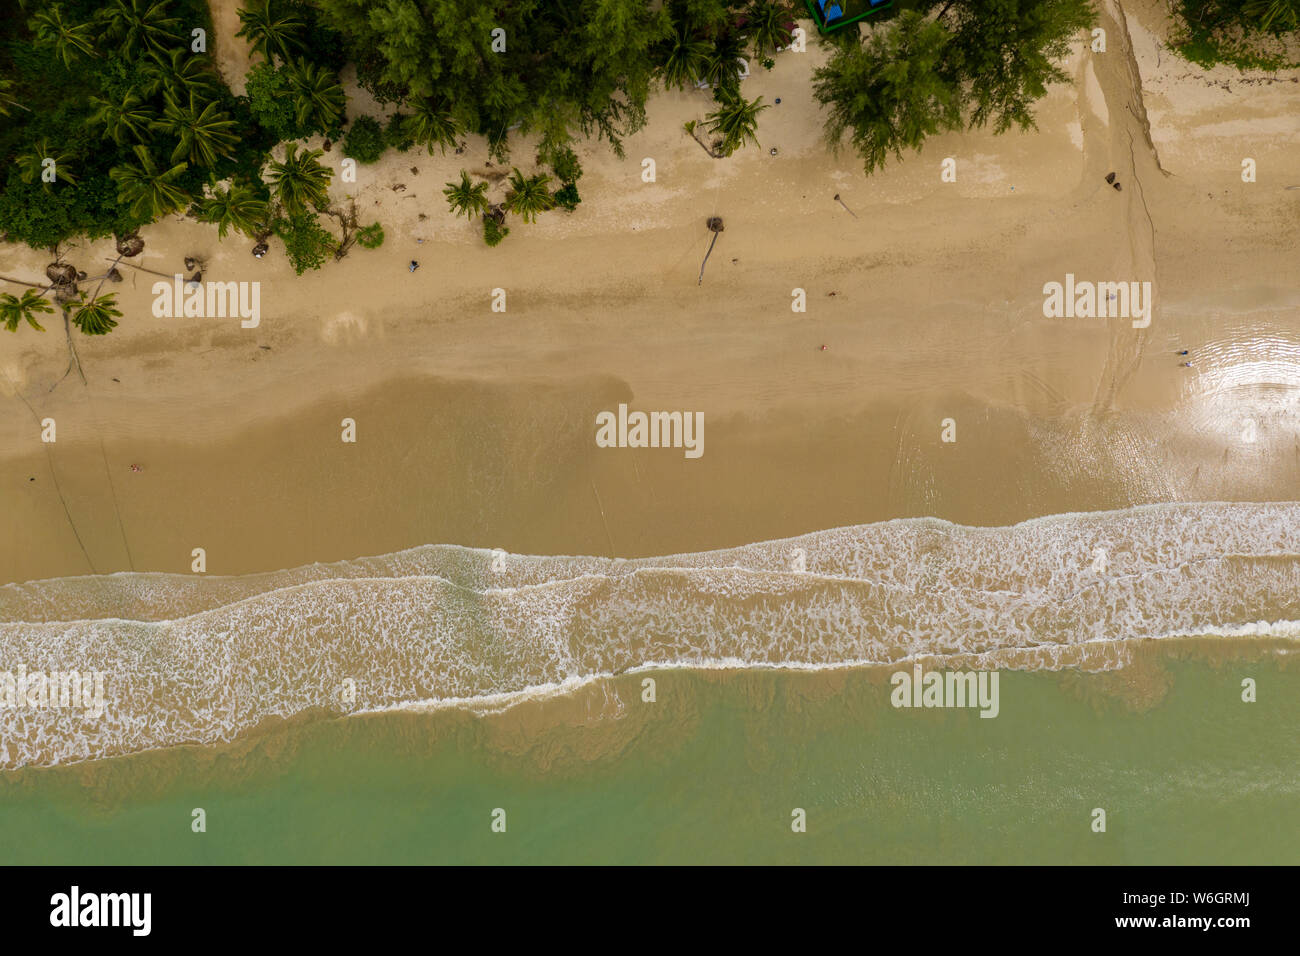 Aerial view of waves breaking on an empty, sandy tropical beach Stock Photo